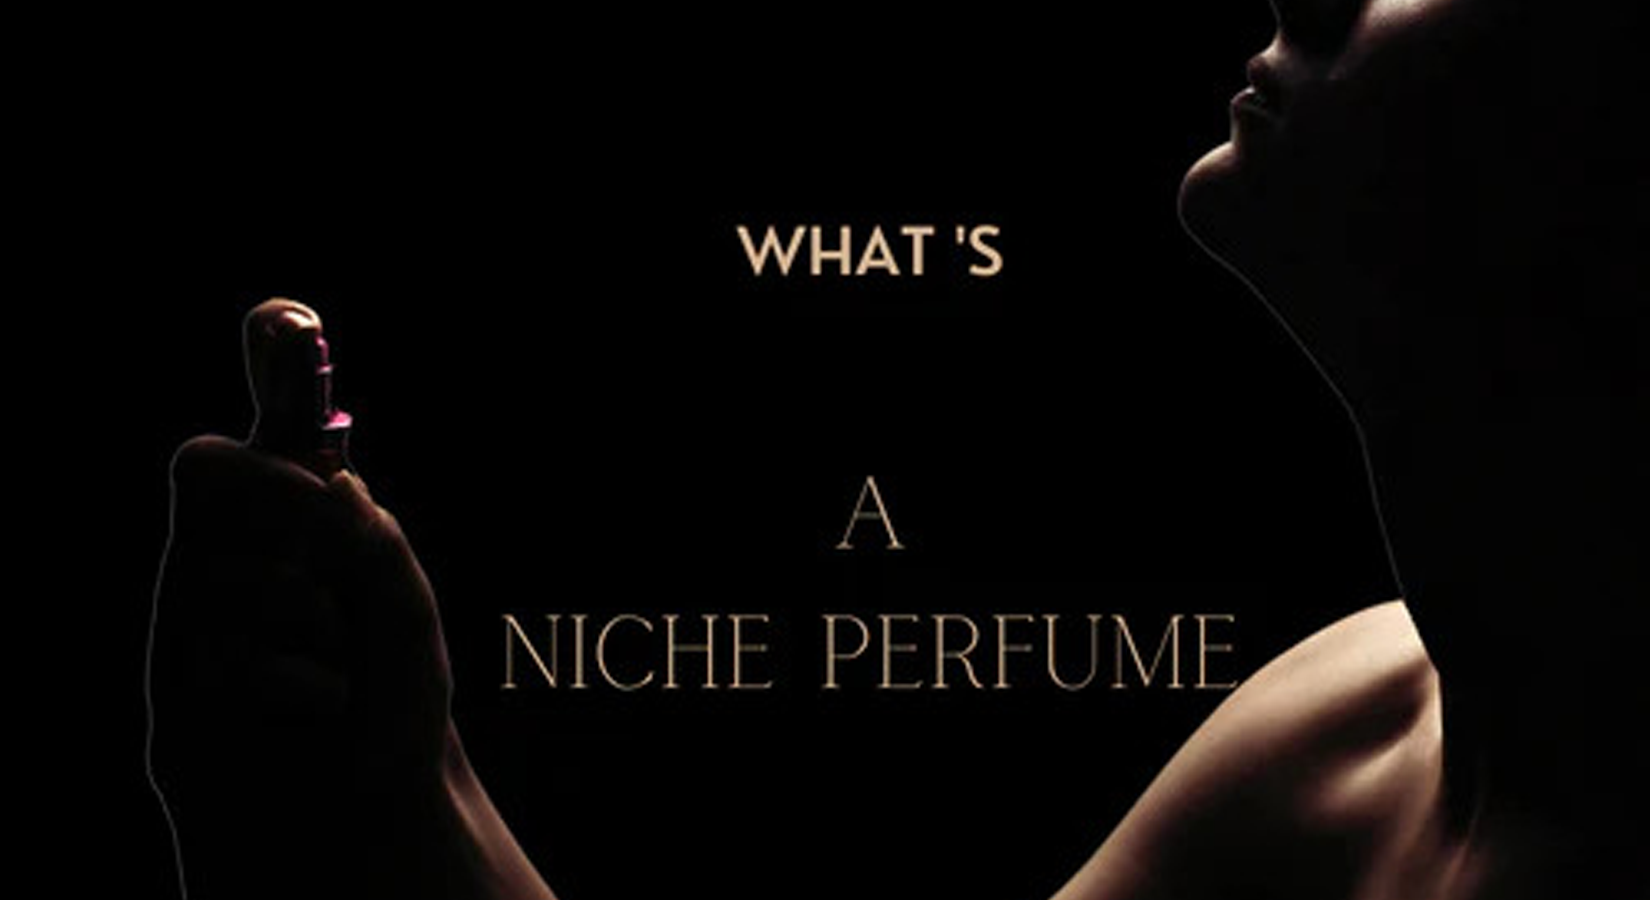 5 Niche perfumes that will make you stand out